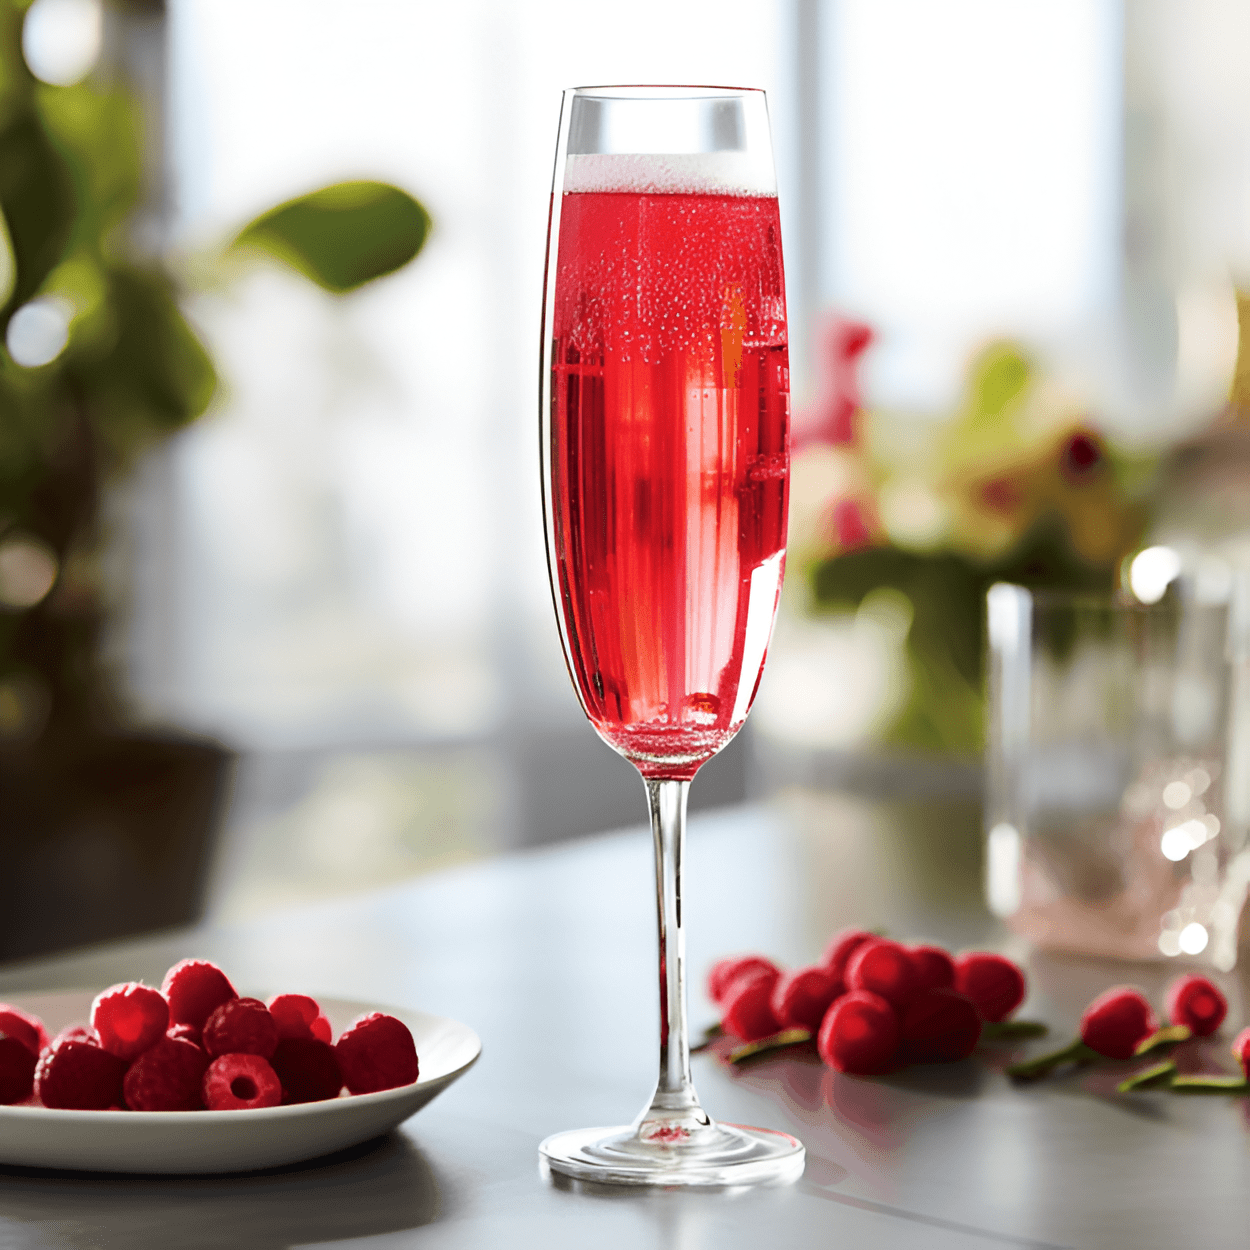 This cocktail offers a refreshing blend of sweet, sour, and bubbly. The raspberry and lime provide a tangy fruitiness, while the champagne adds a sophisticated sparkle. The gin gives it a strong, crisp undertone.